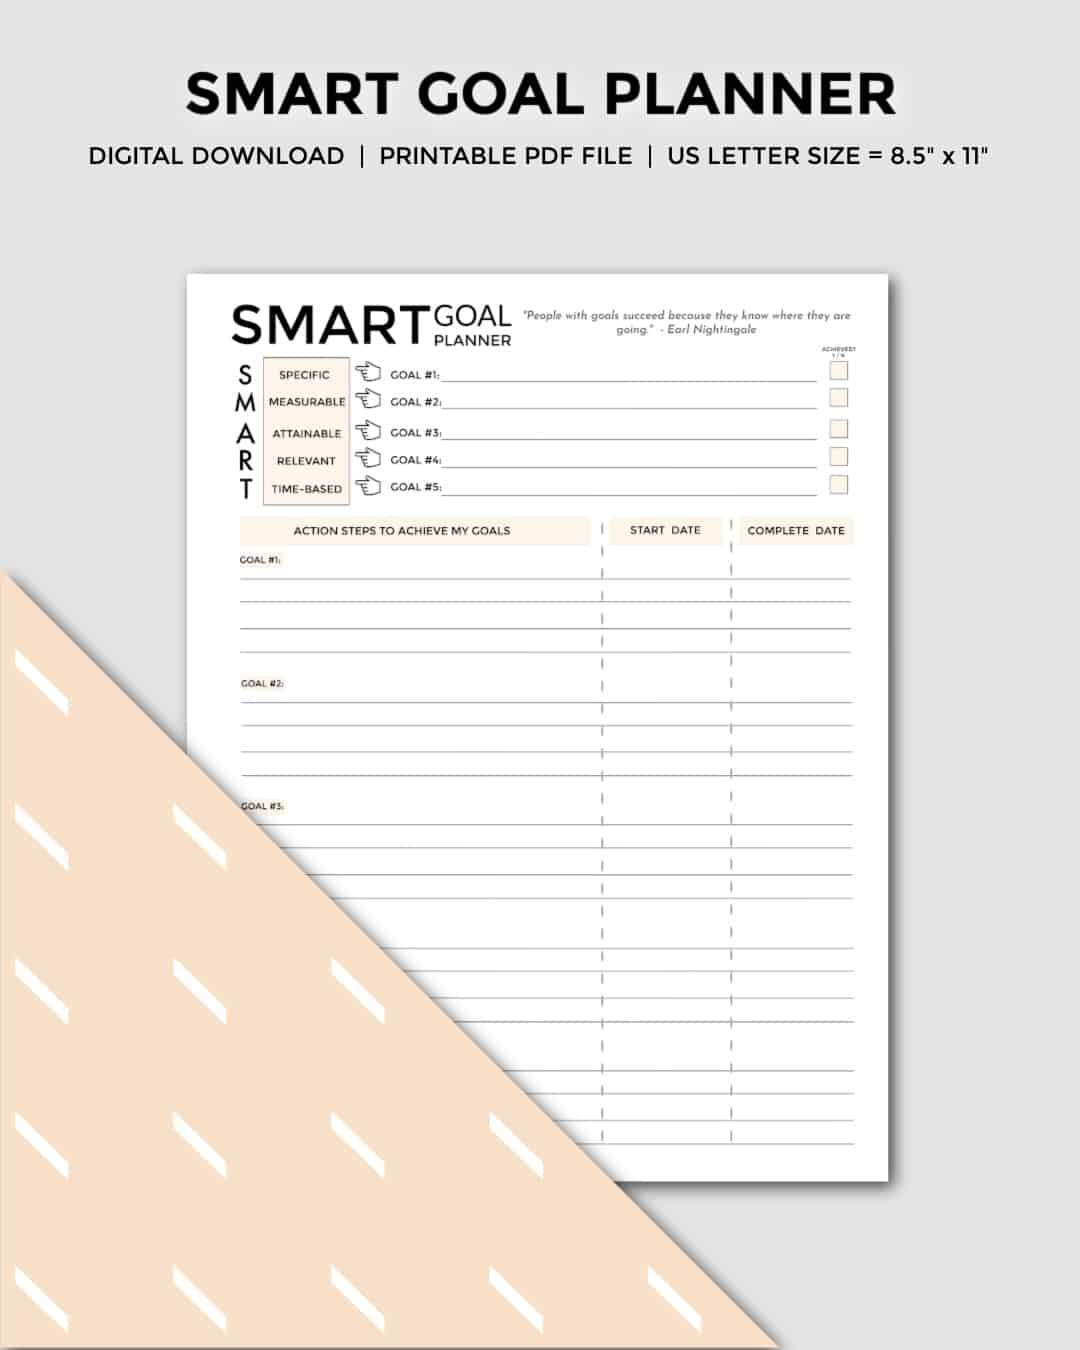 A SMART goal printable planner to set and achieve goals